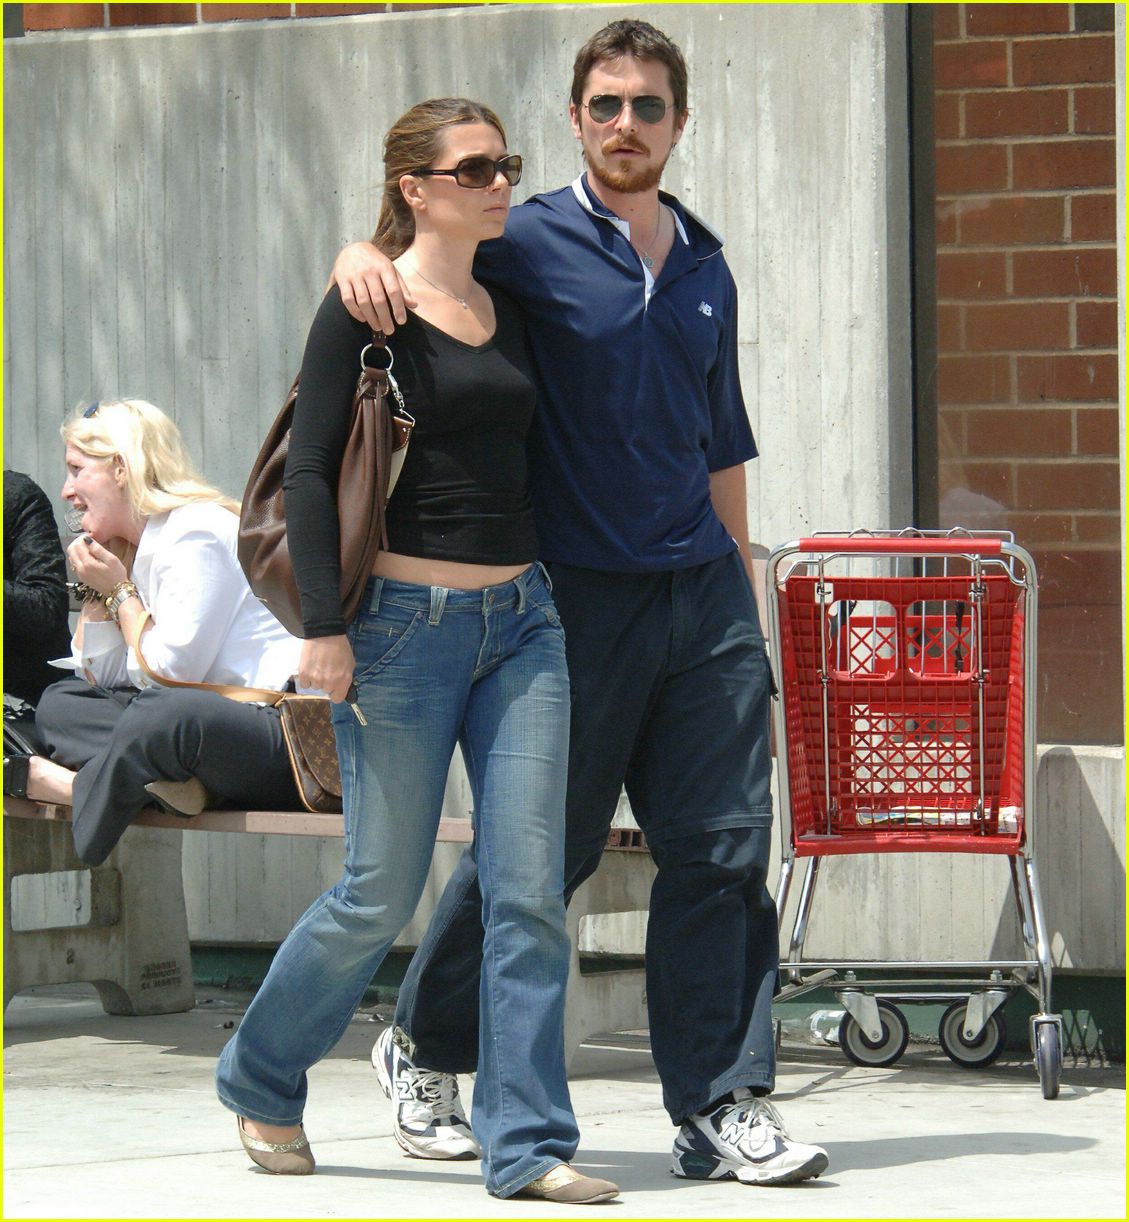 ALL ABOUT HOLLYWOOD STARS: Christian Bale with Wife Pics